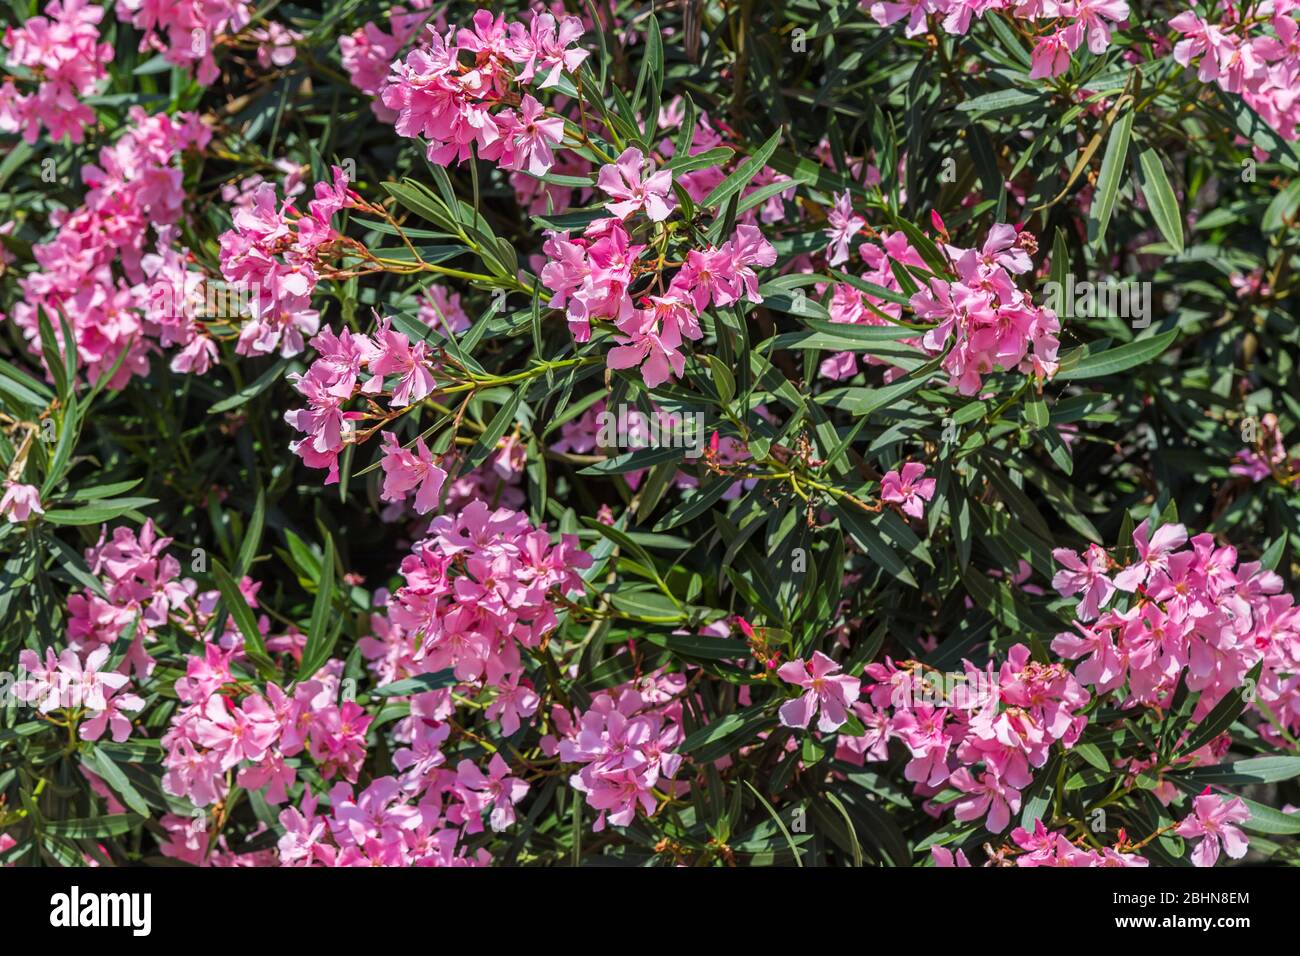 Pink oleander flowers (Nerium oleander). This is a shrub or small tree in the family Apocynaceae. Oleander is one of the most poisonous garden plants. Stock Photo